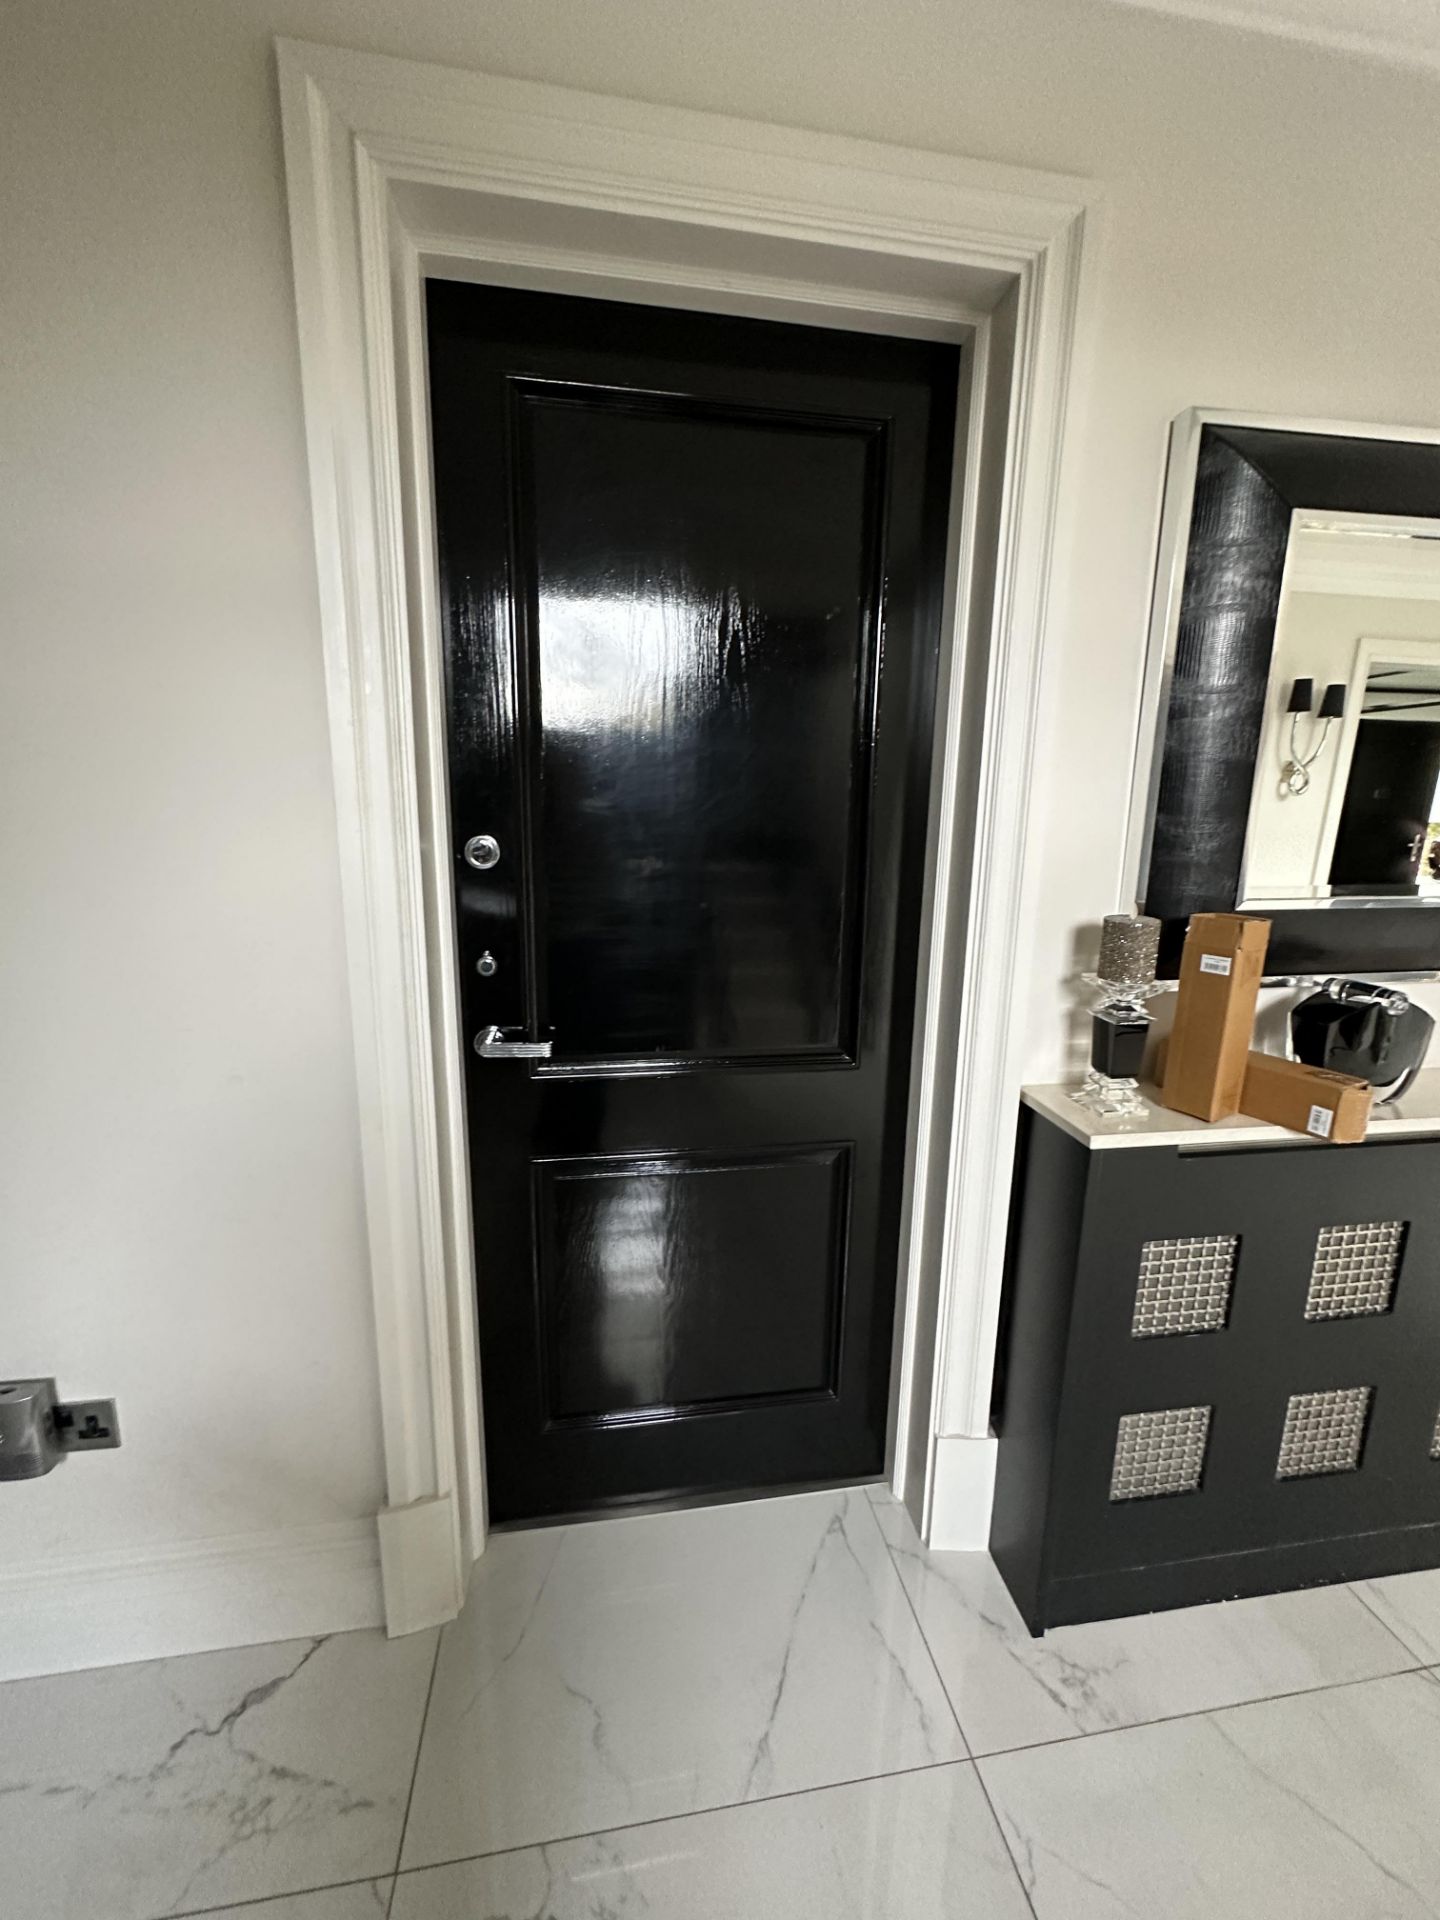 1 x SOLID OAK Fire Door In Black Gloss And Stainless Steel Hardware - Image 4 of 4